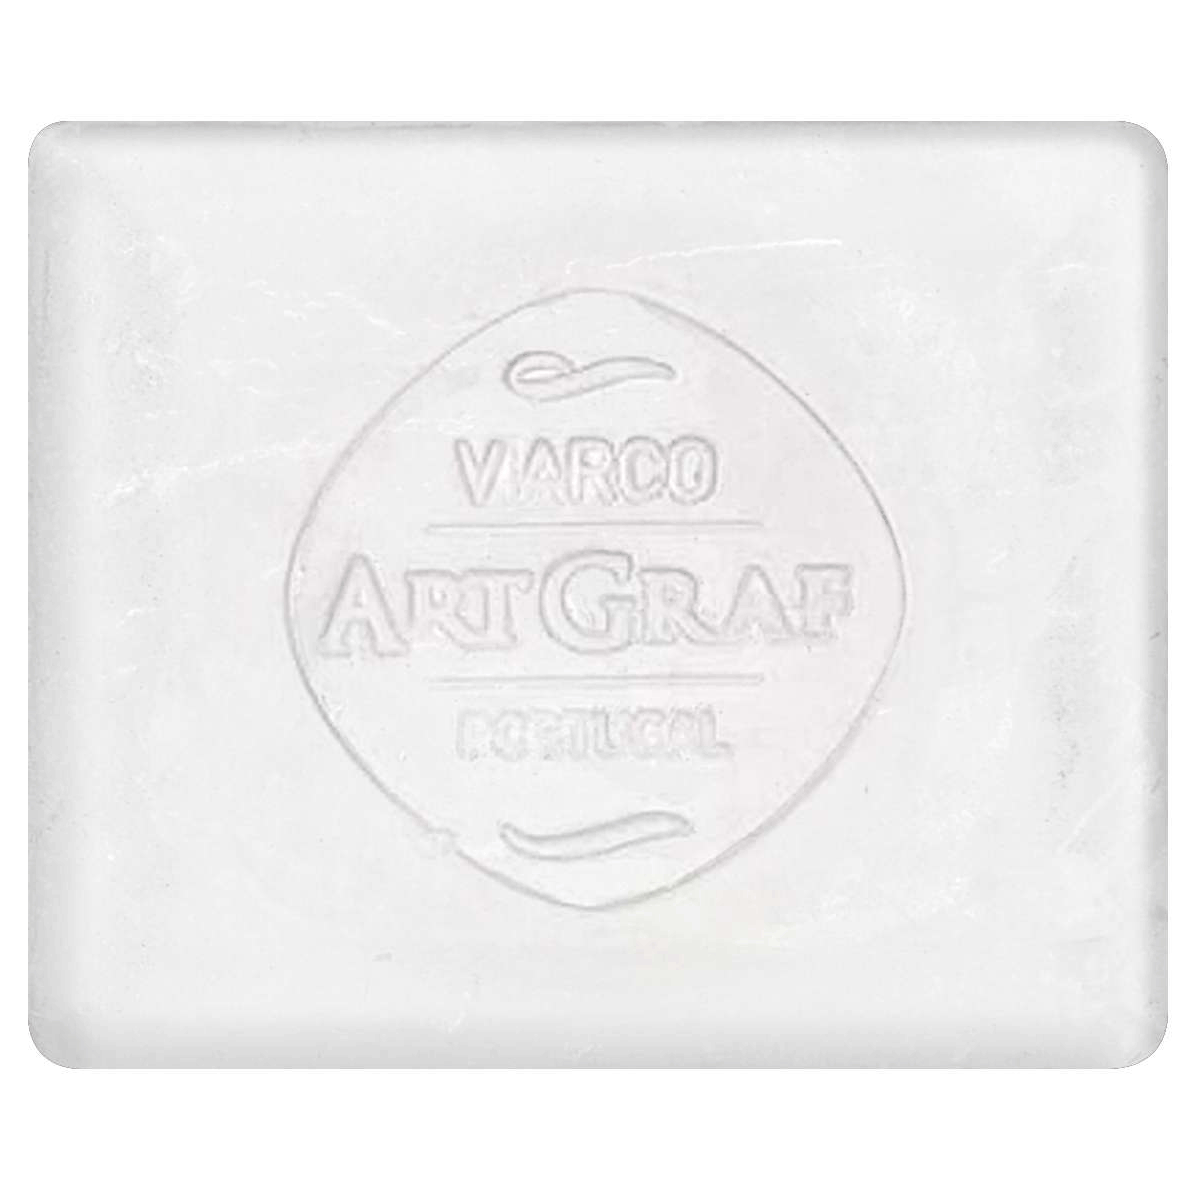 ArtGraf Watersoluble Sketching Disc (Tailor Shape) White